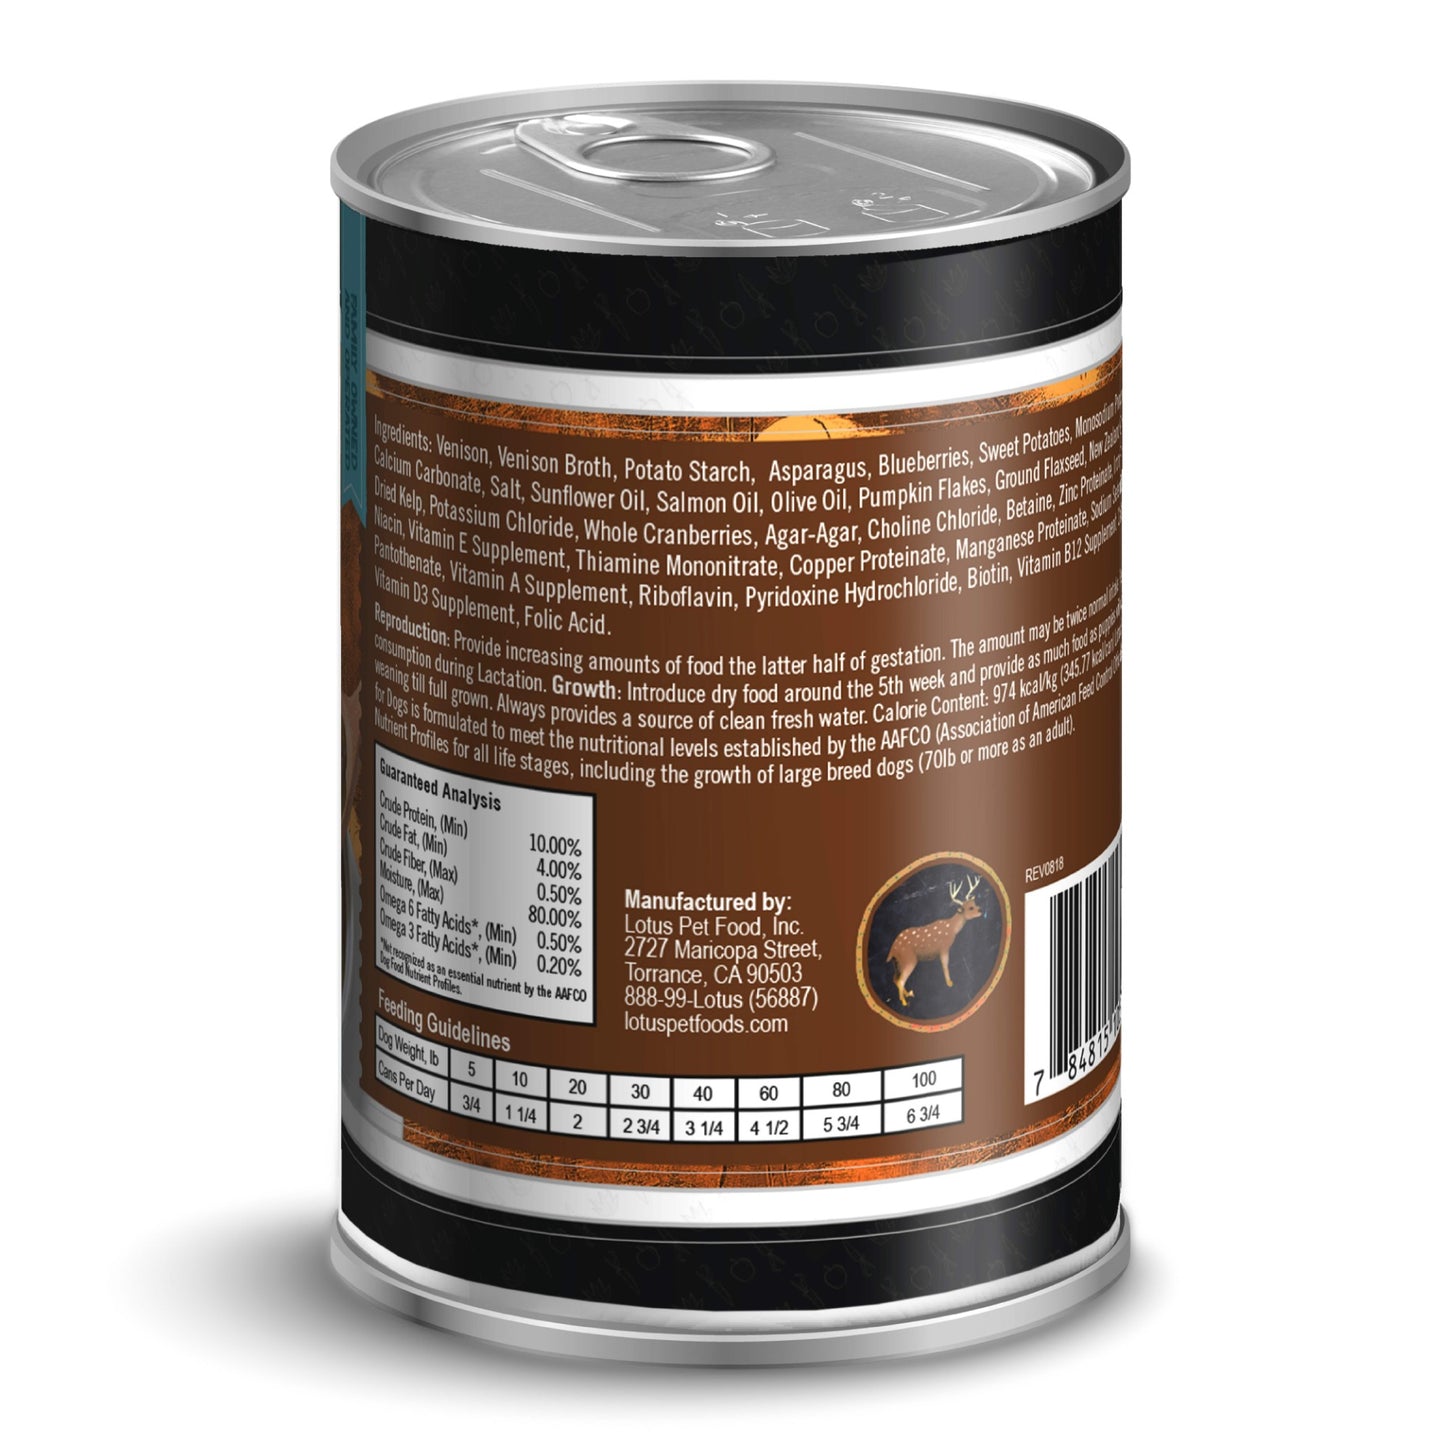 Lotus Dog Grain-Free Venison Stew for Dogs